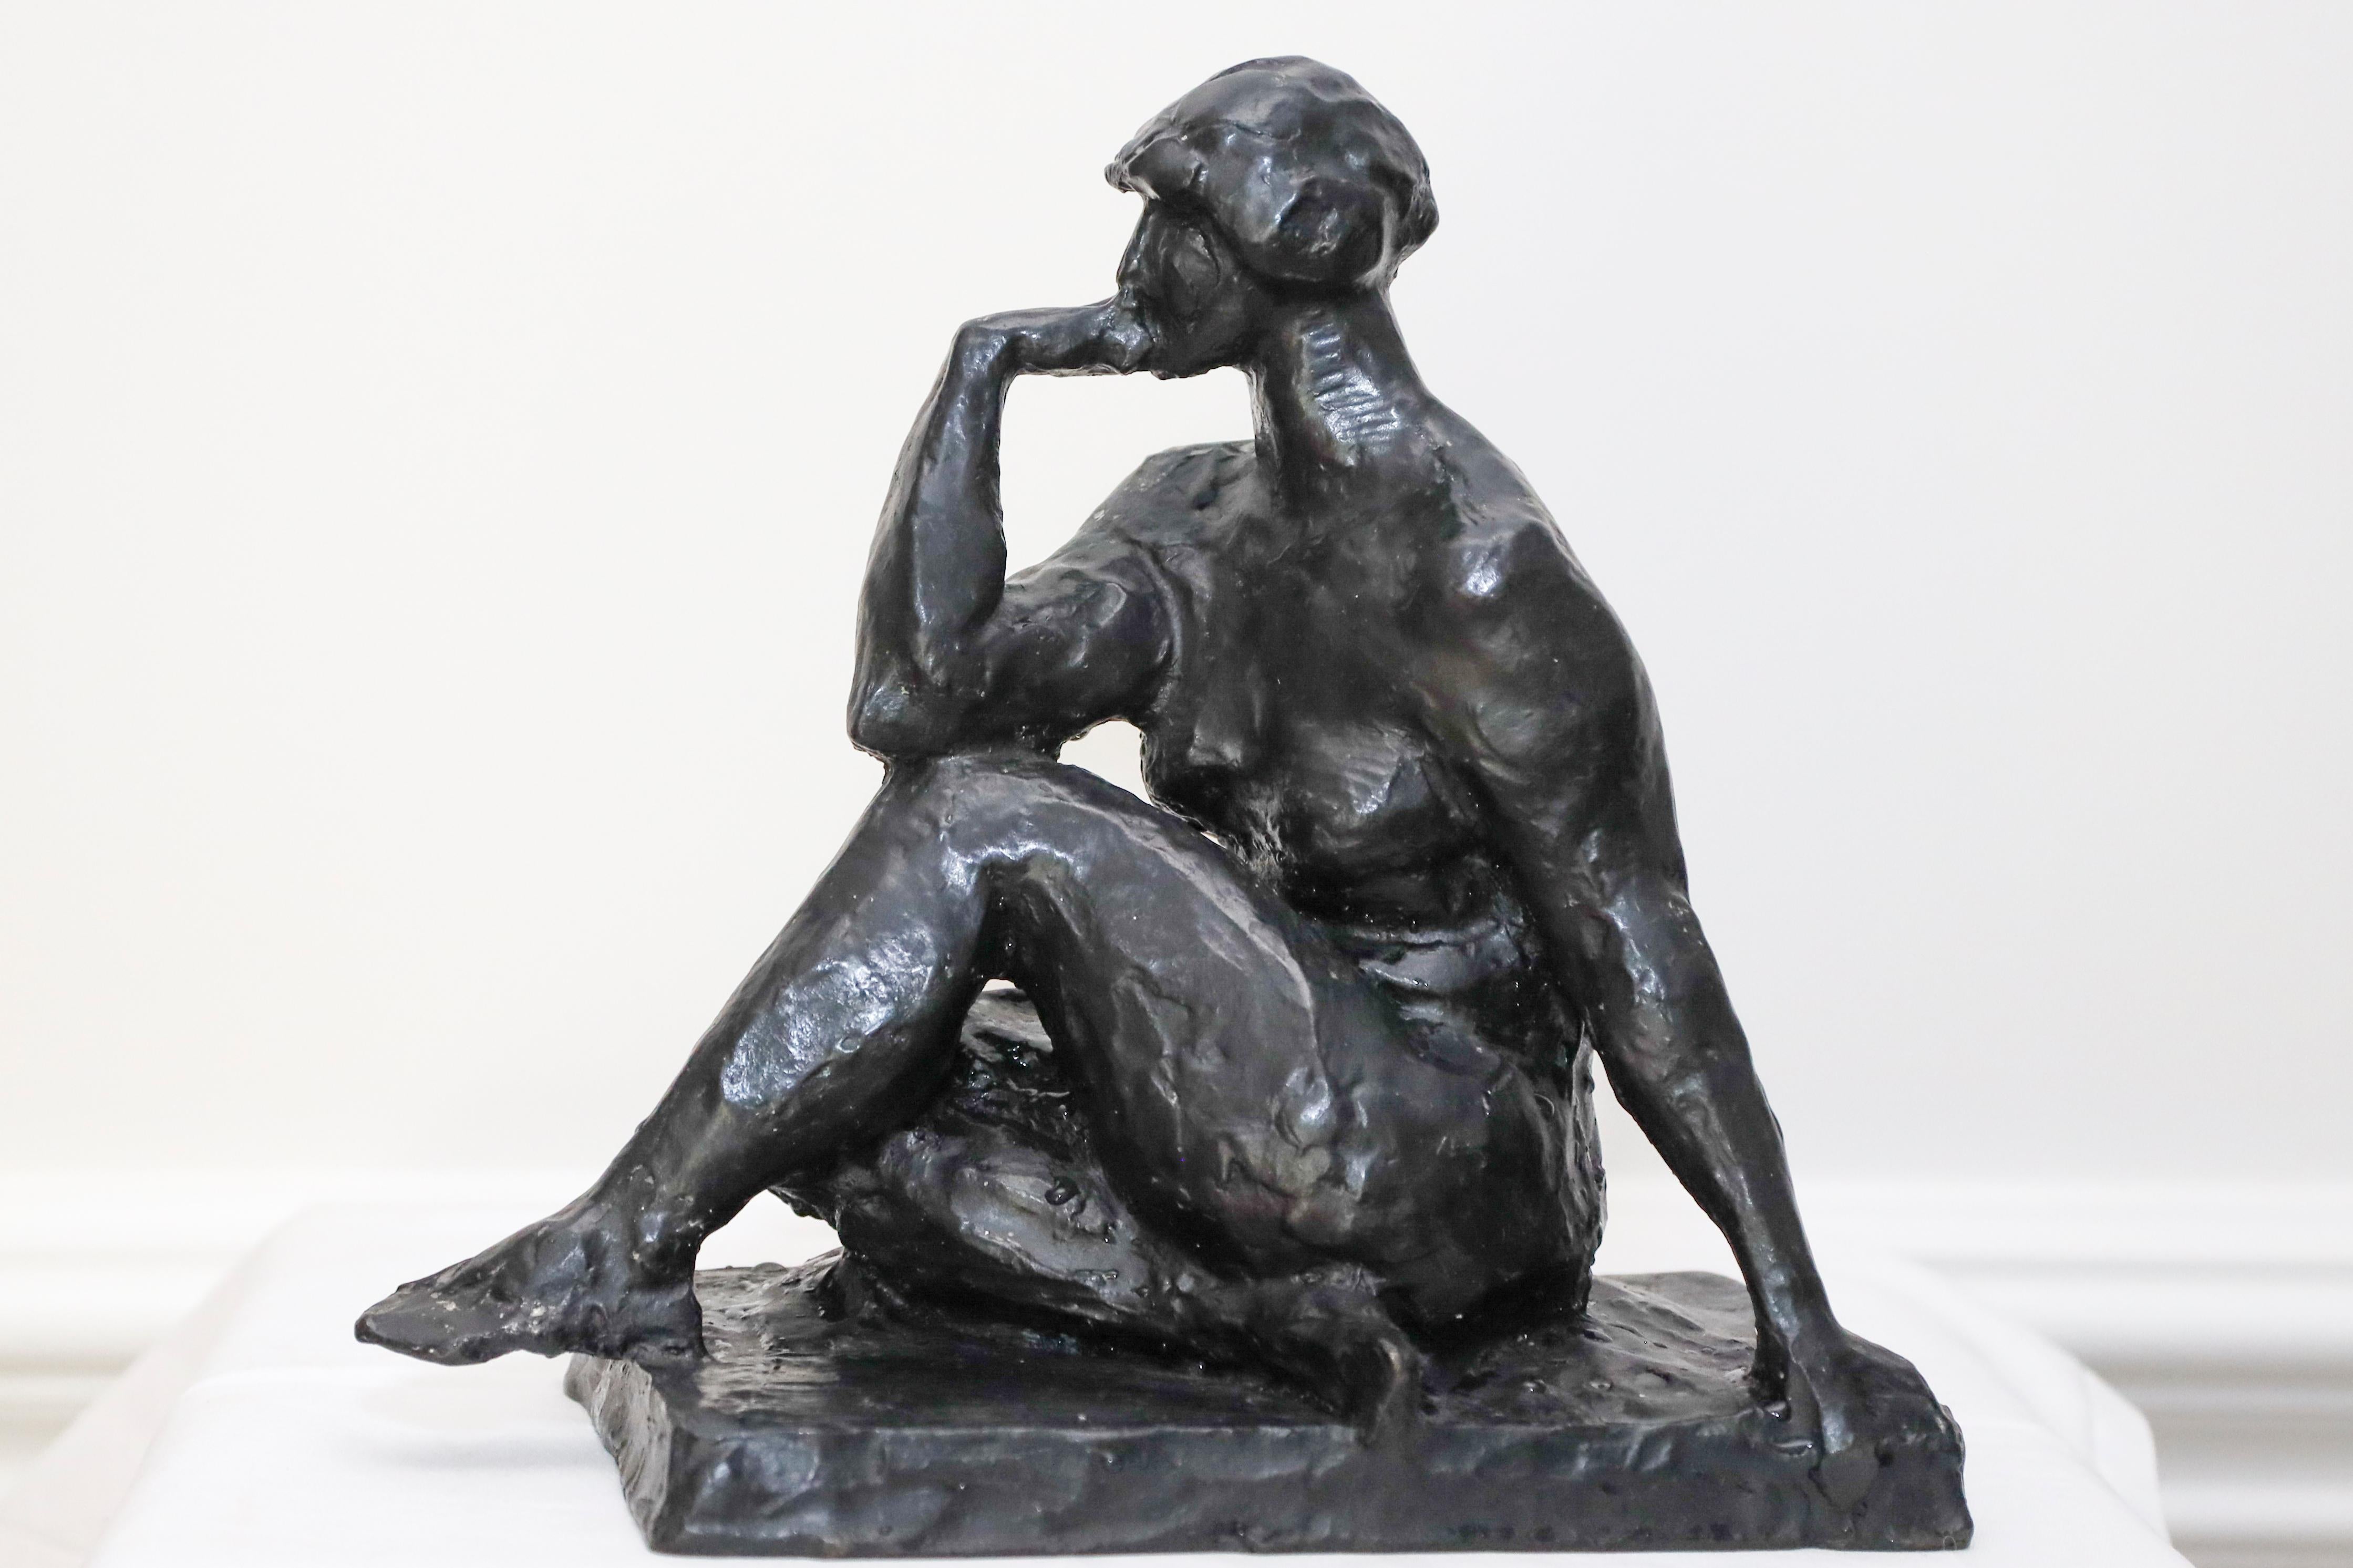 The bronze sculpture of a woman by Charles Rumsey is undated, but was created at a point in his career where he began to transition from realism to more modern, looser depictions of women and even his animal sculptures.    This was a study for a